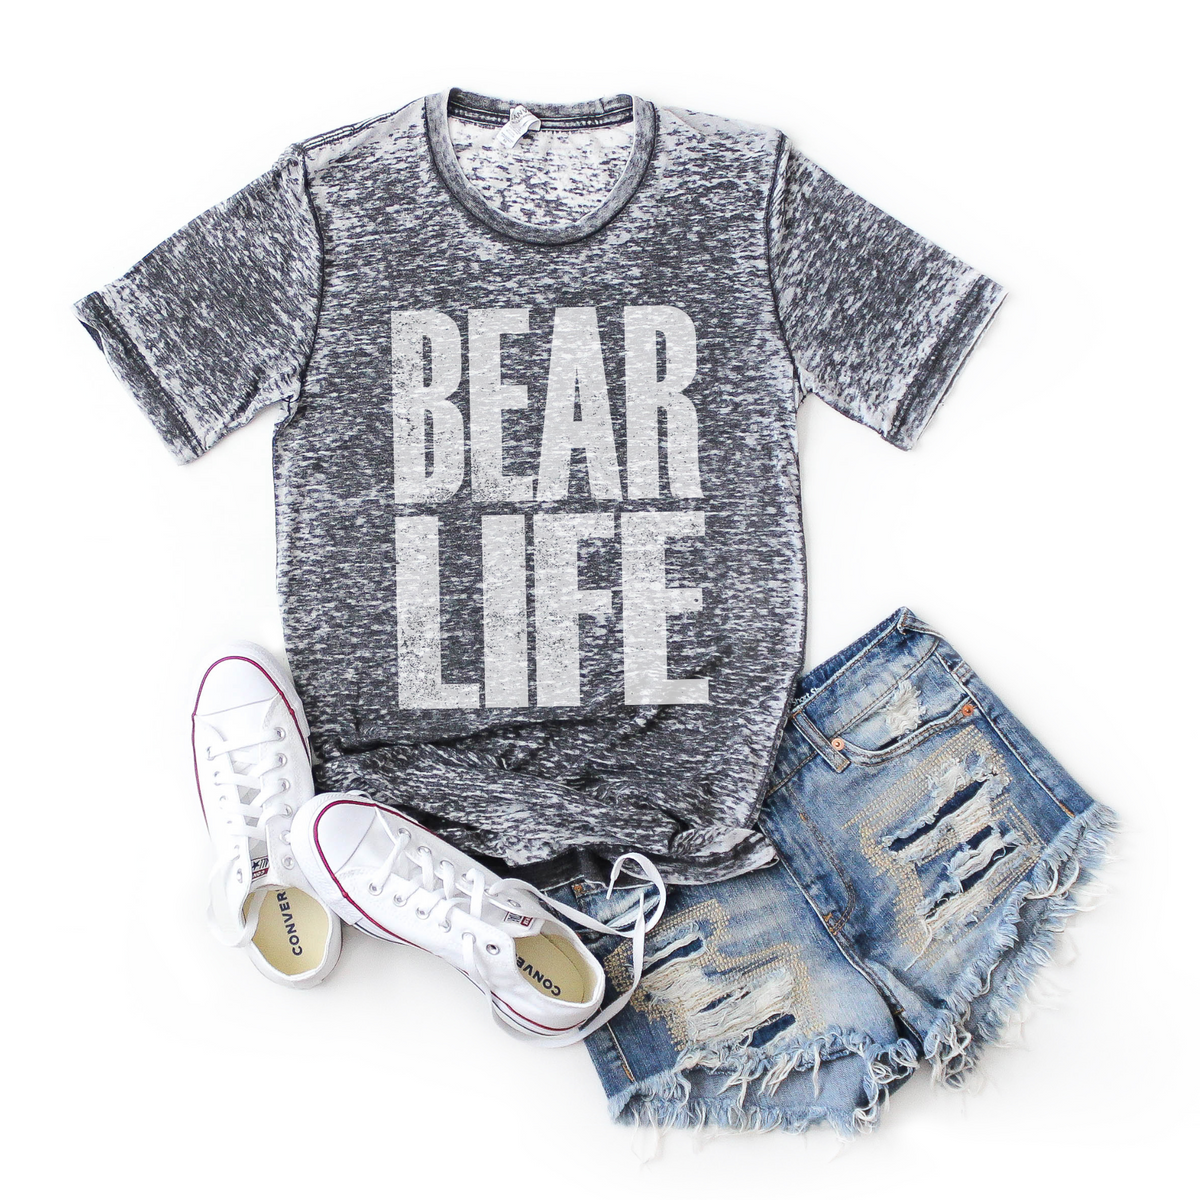 Bear Life Super Faded Distressed White Digital Design, PNG